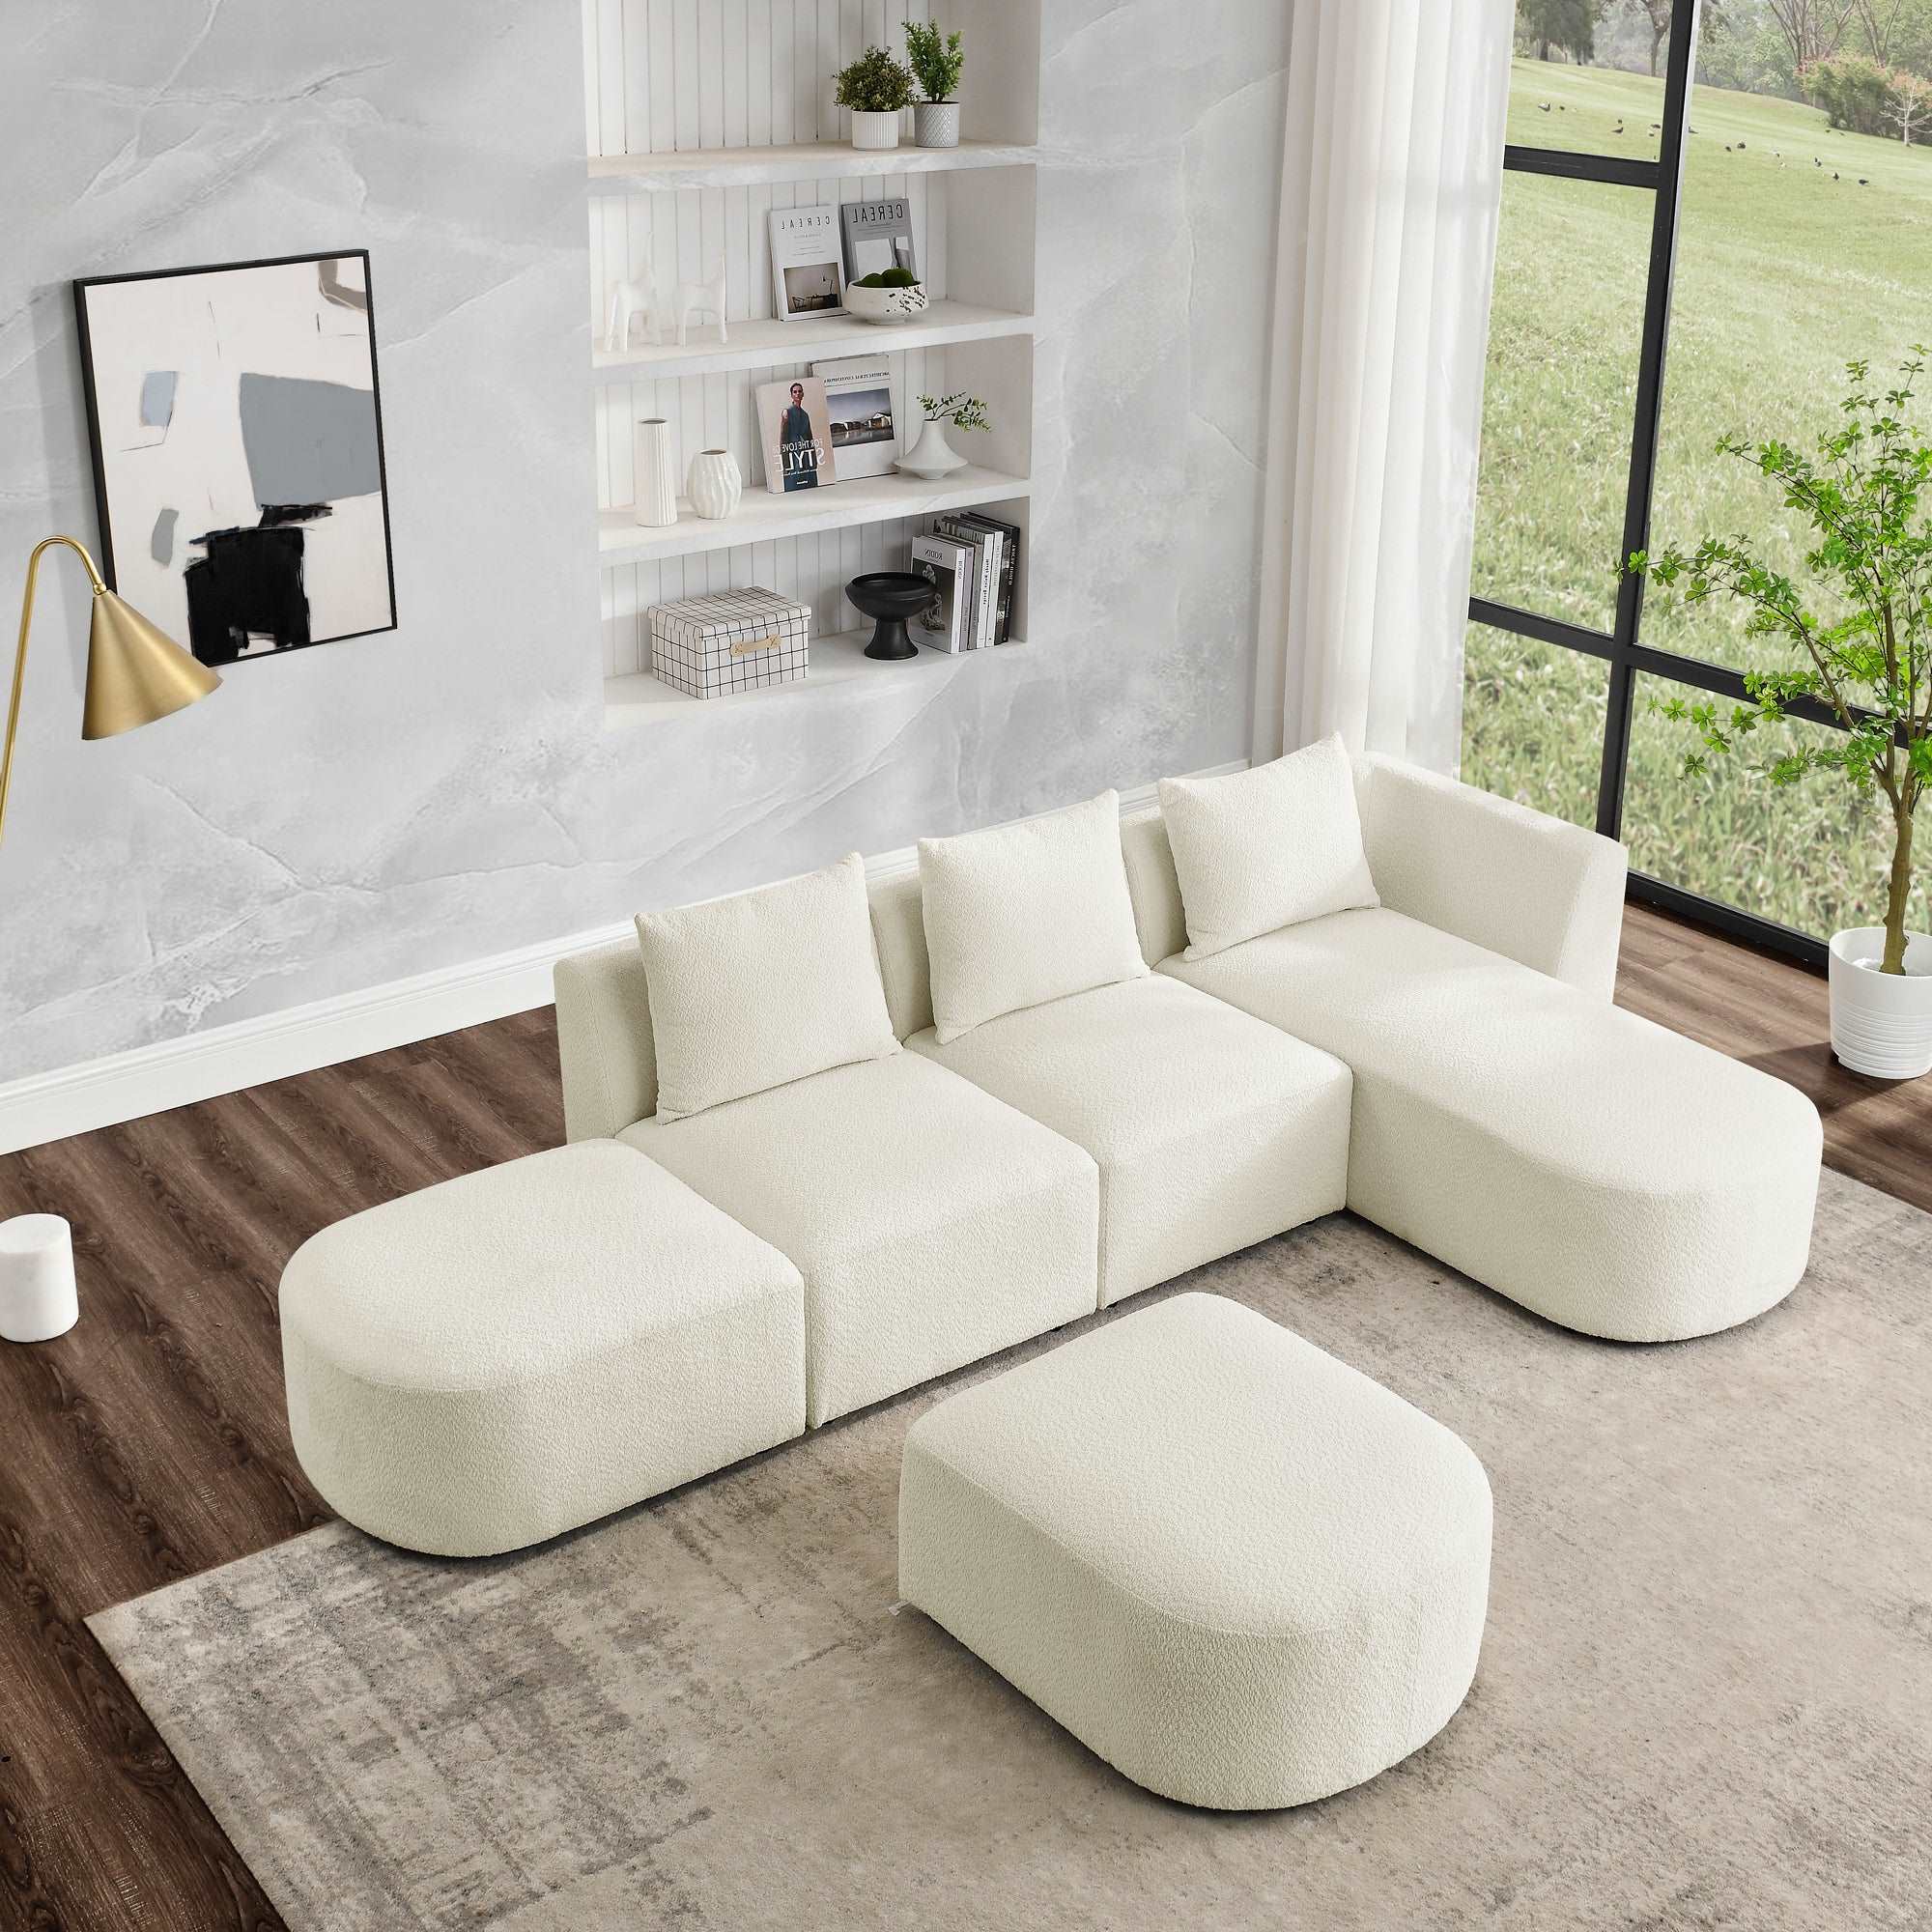 Bellemave 113" L-Shape Sectional Sofa with Right Side Chaise and Ottoman, Modular Sofa, DIY Combination